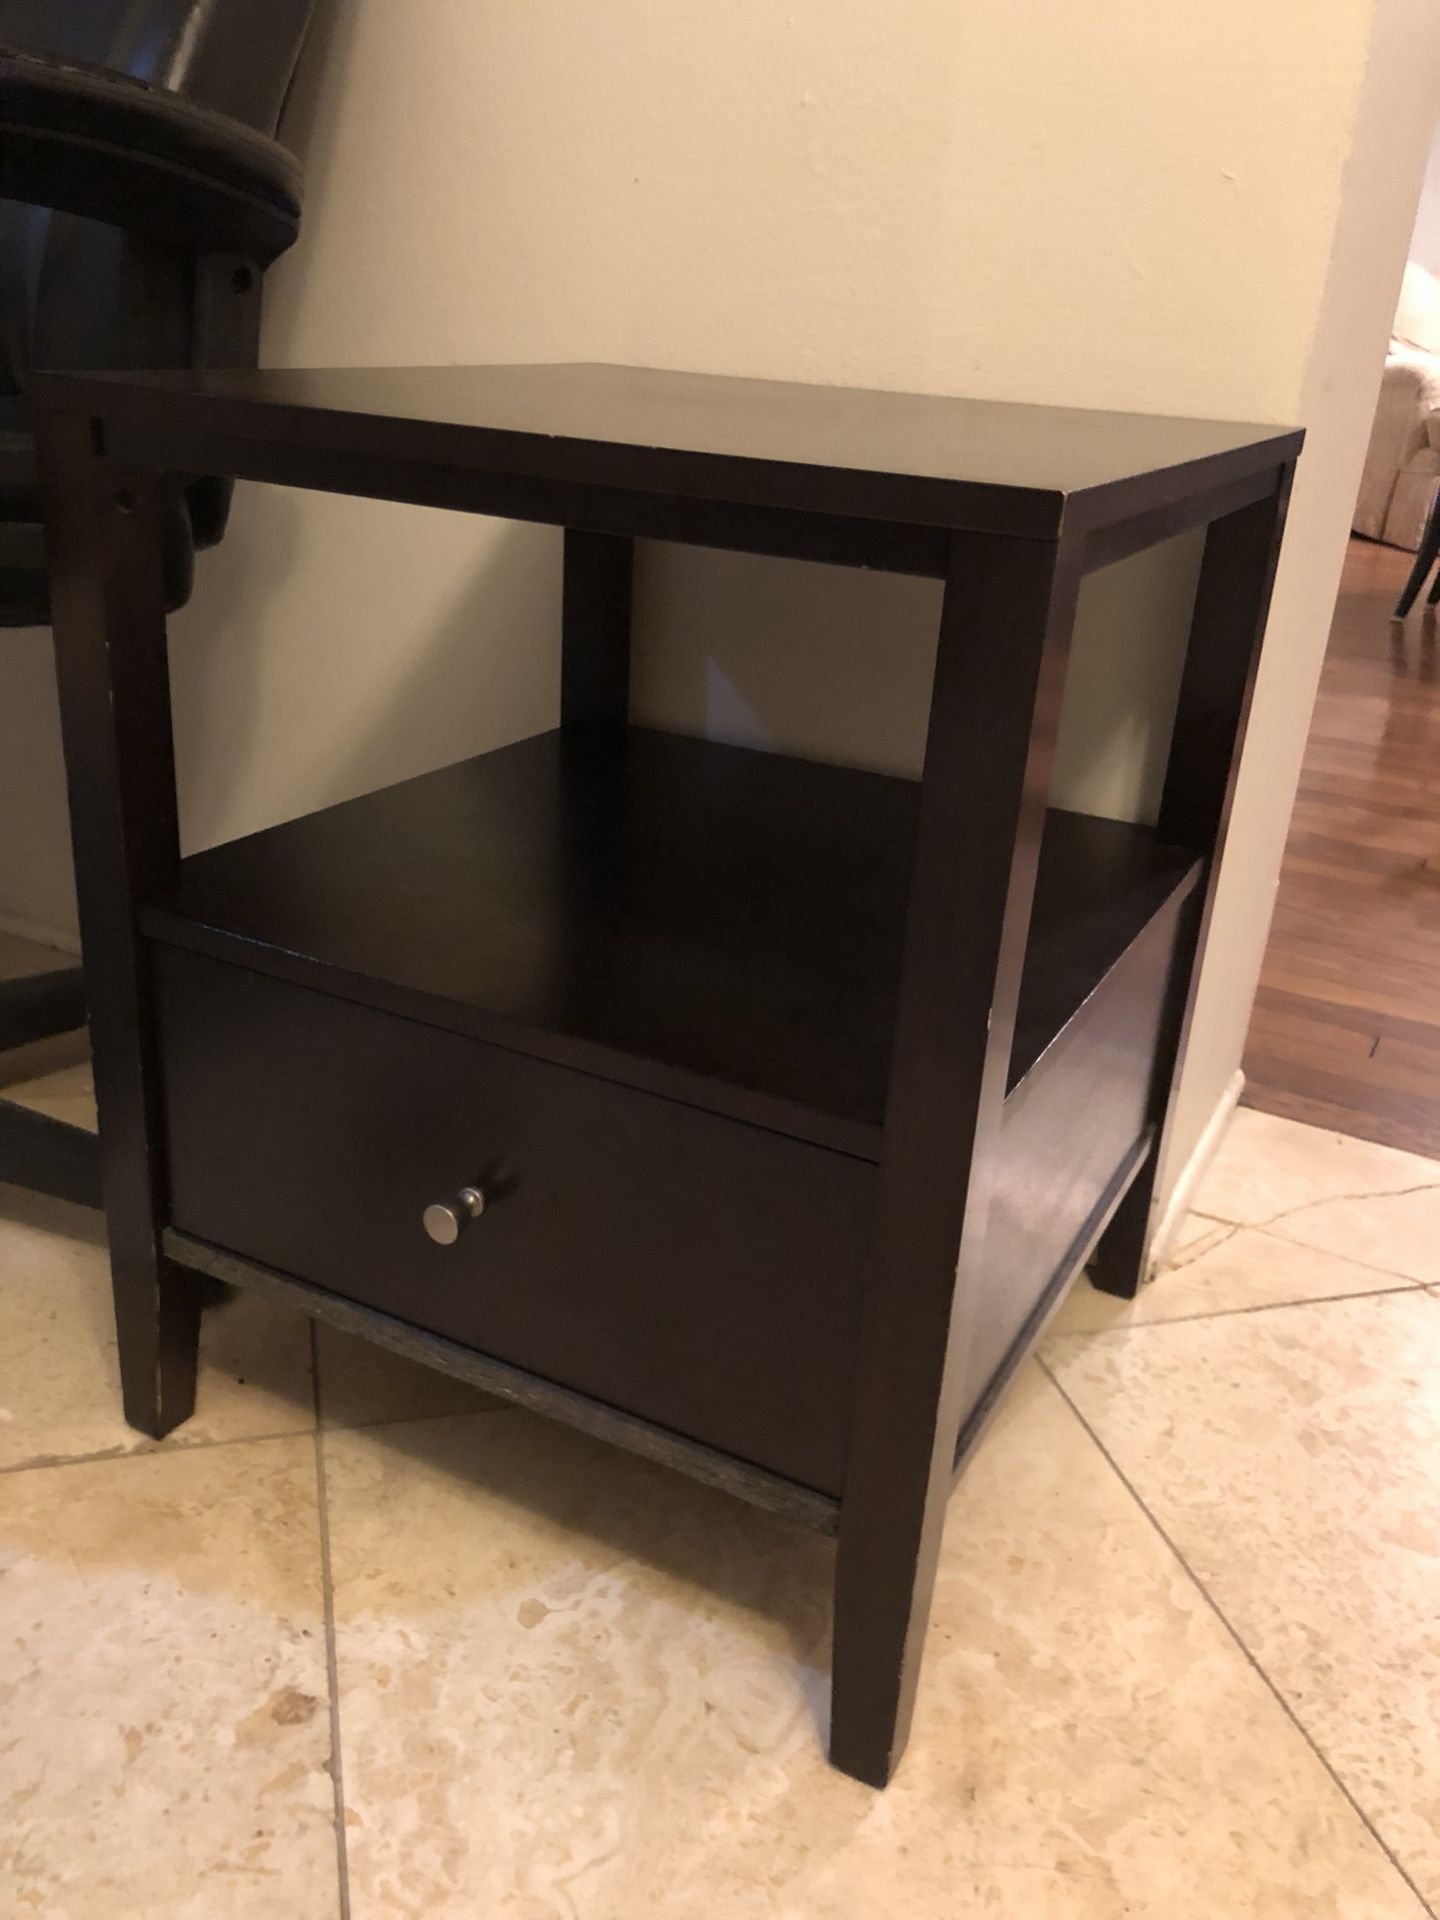 End table (only one. I don’t have a set)